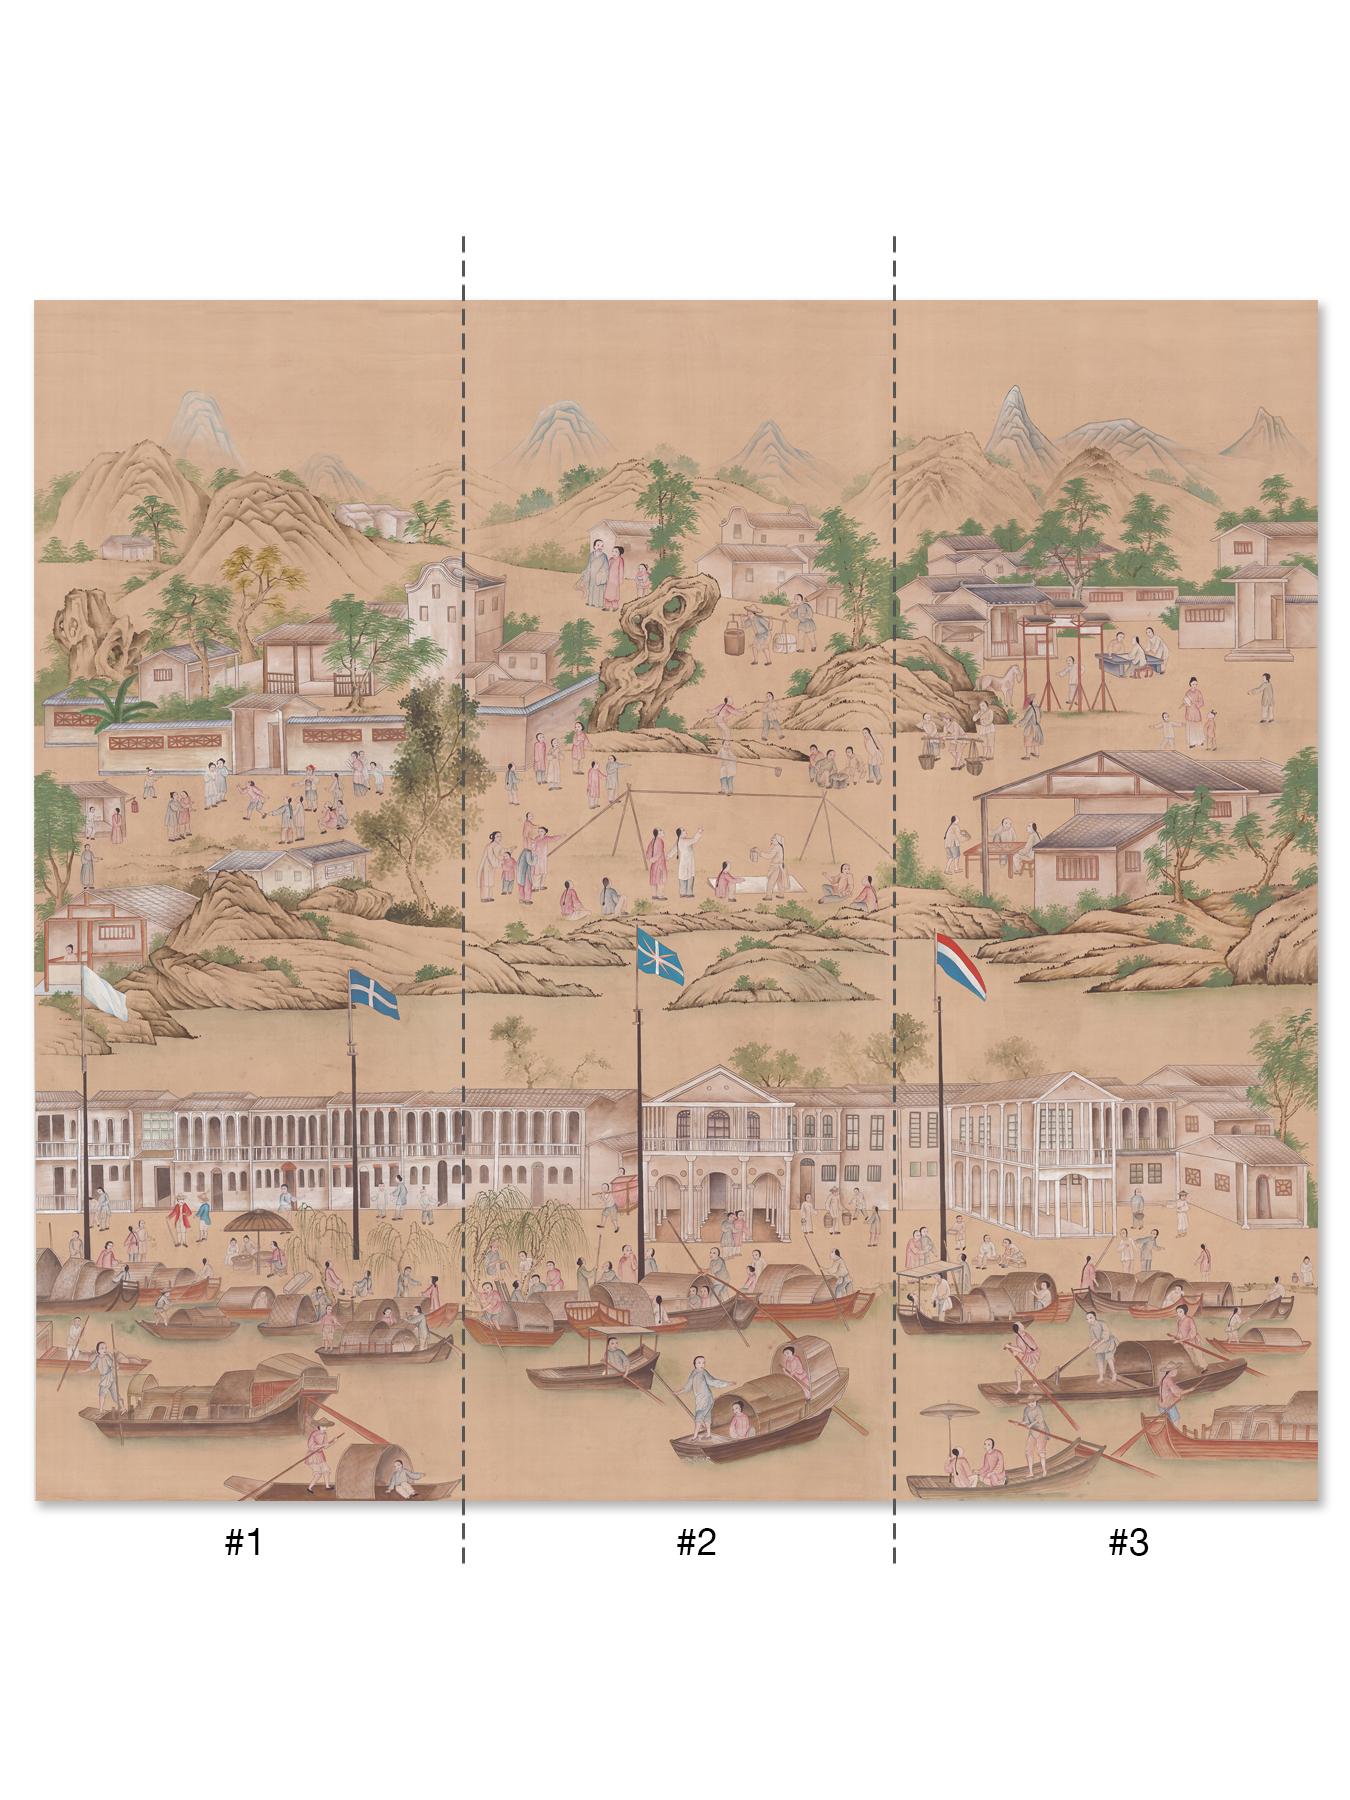 Old Canton captures the romantic age of western expansion in china as commercial influences began to appear. This mural is hand painted in the chinoiserie style on silk paper depicting the daily life of cities like Canton and Macau in the mid 18th